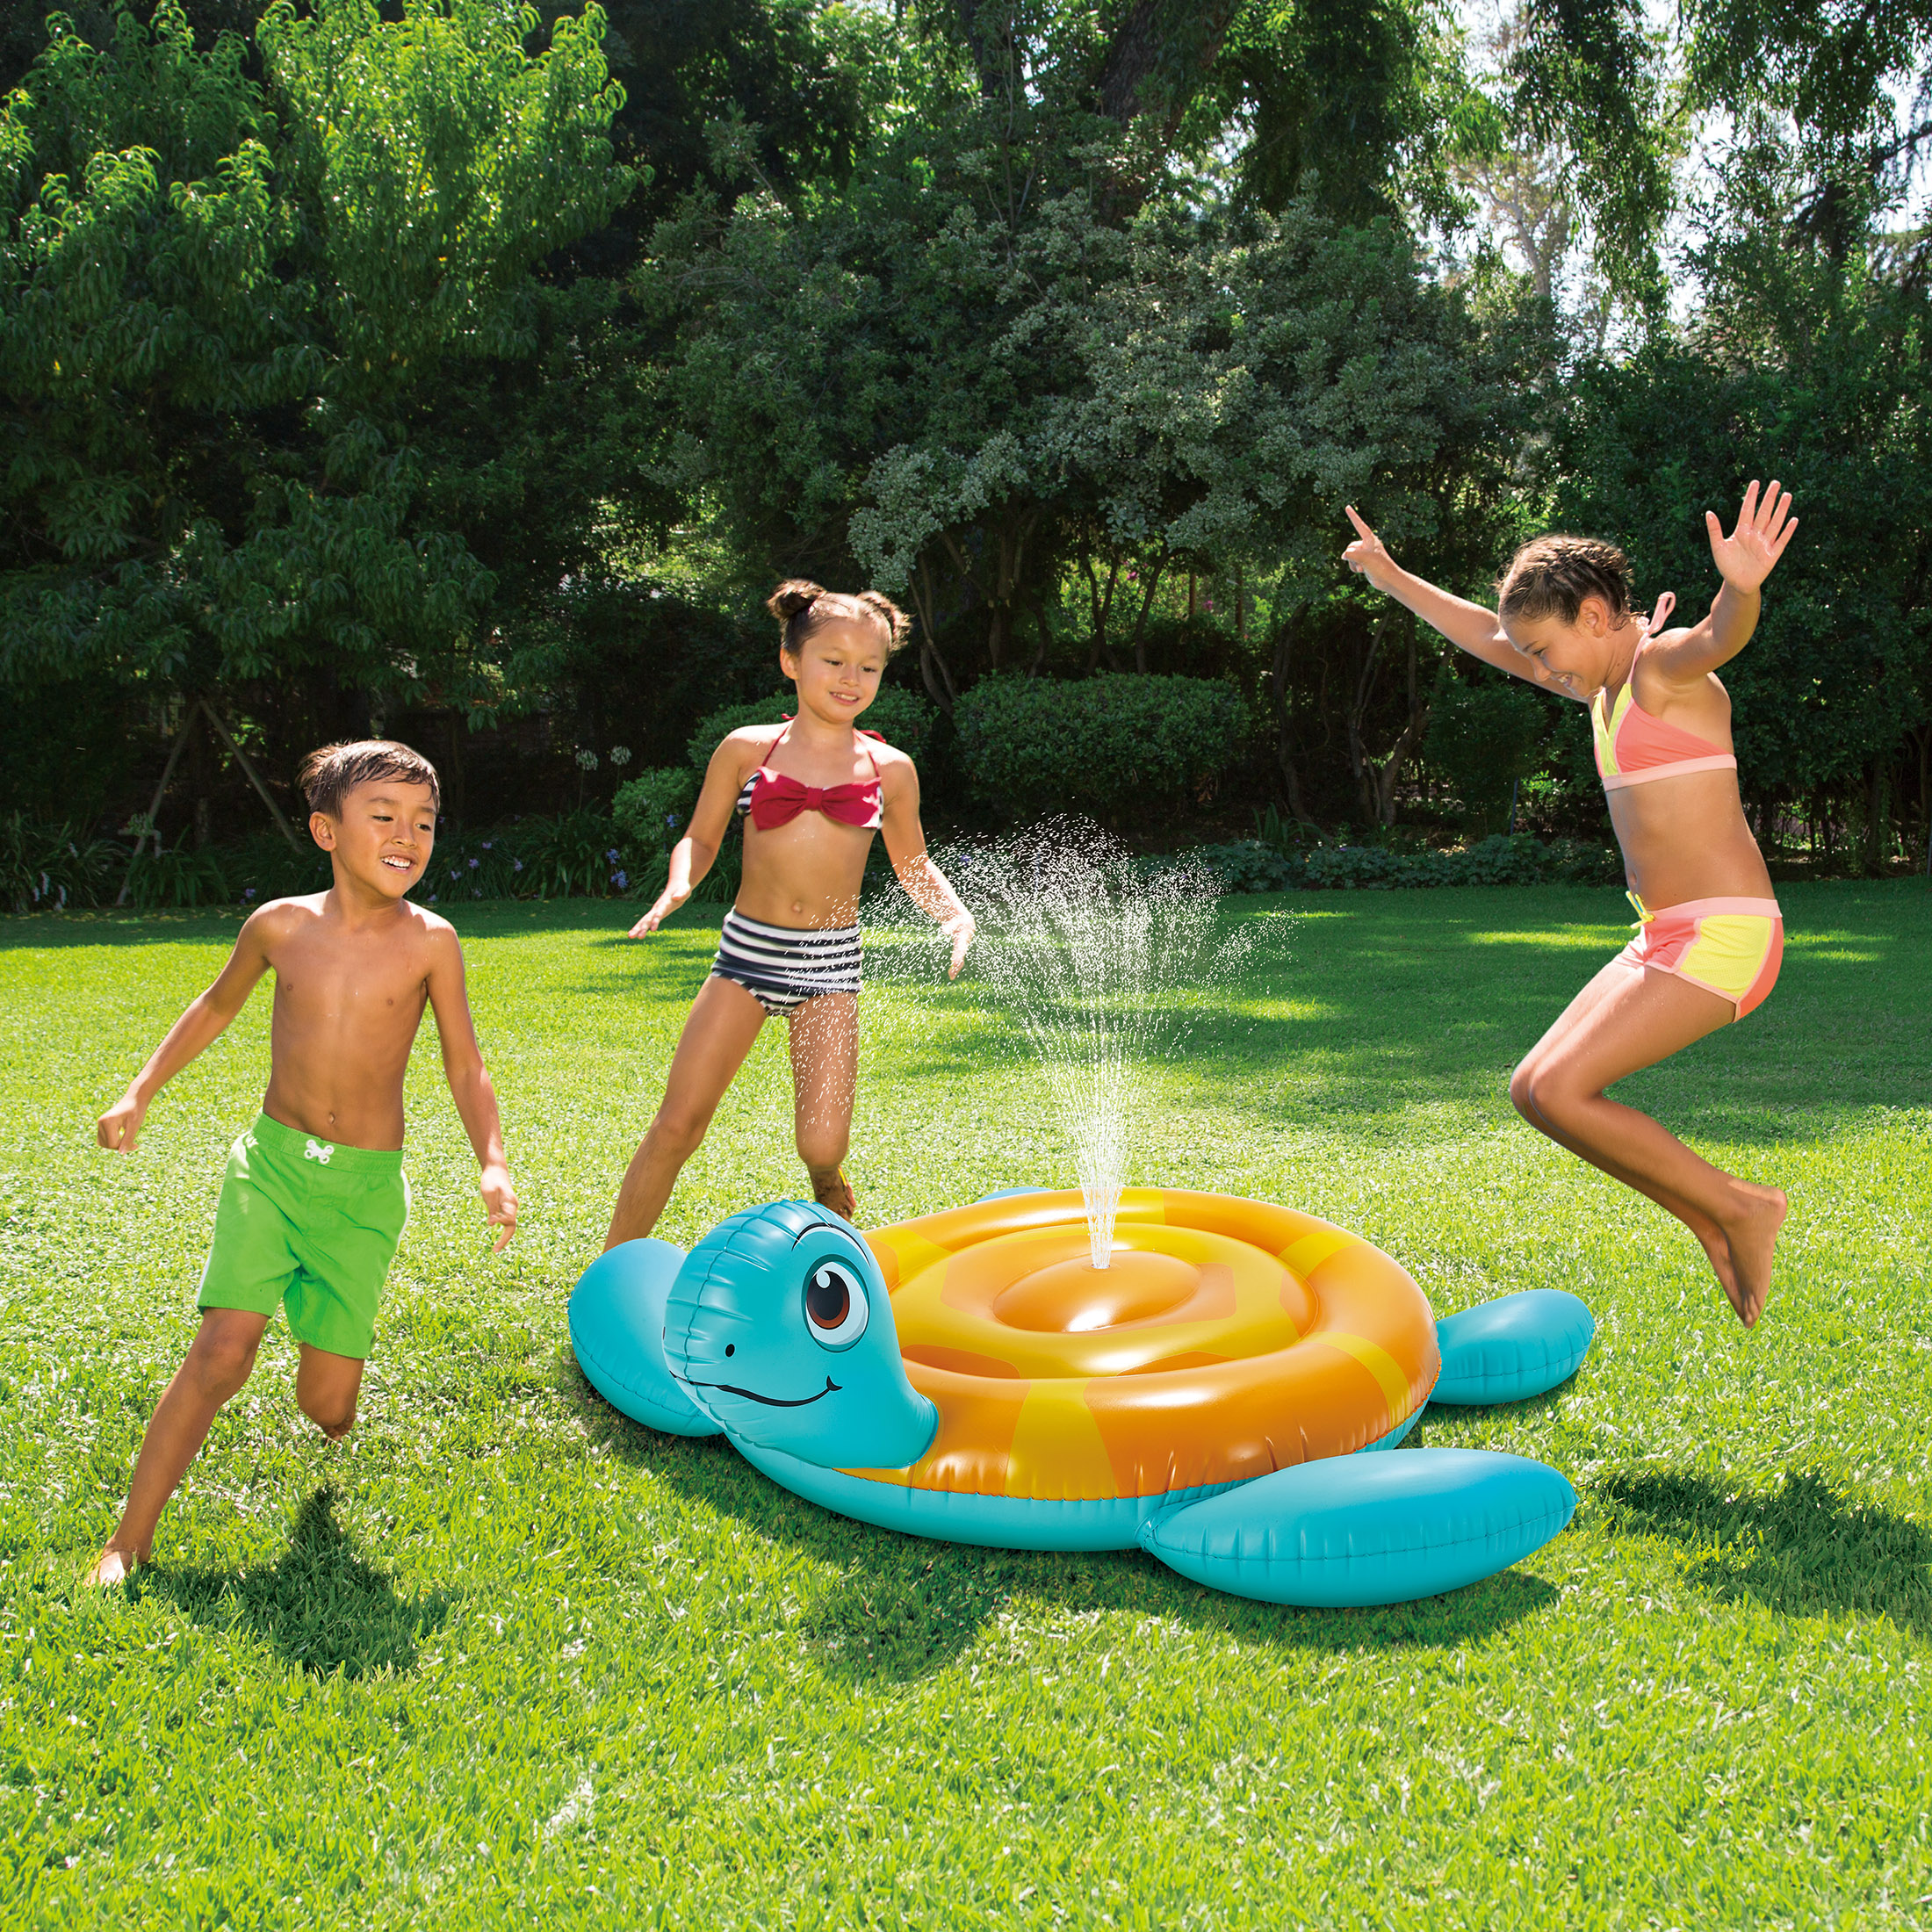 Play Day Inflatable Sea Turtle Water Sprinkler Yard Game, for Kids, Age 3 & up, Unisex - image 3 of 5